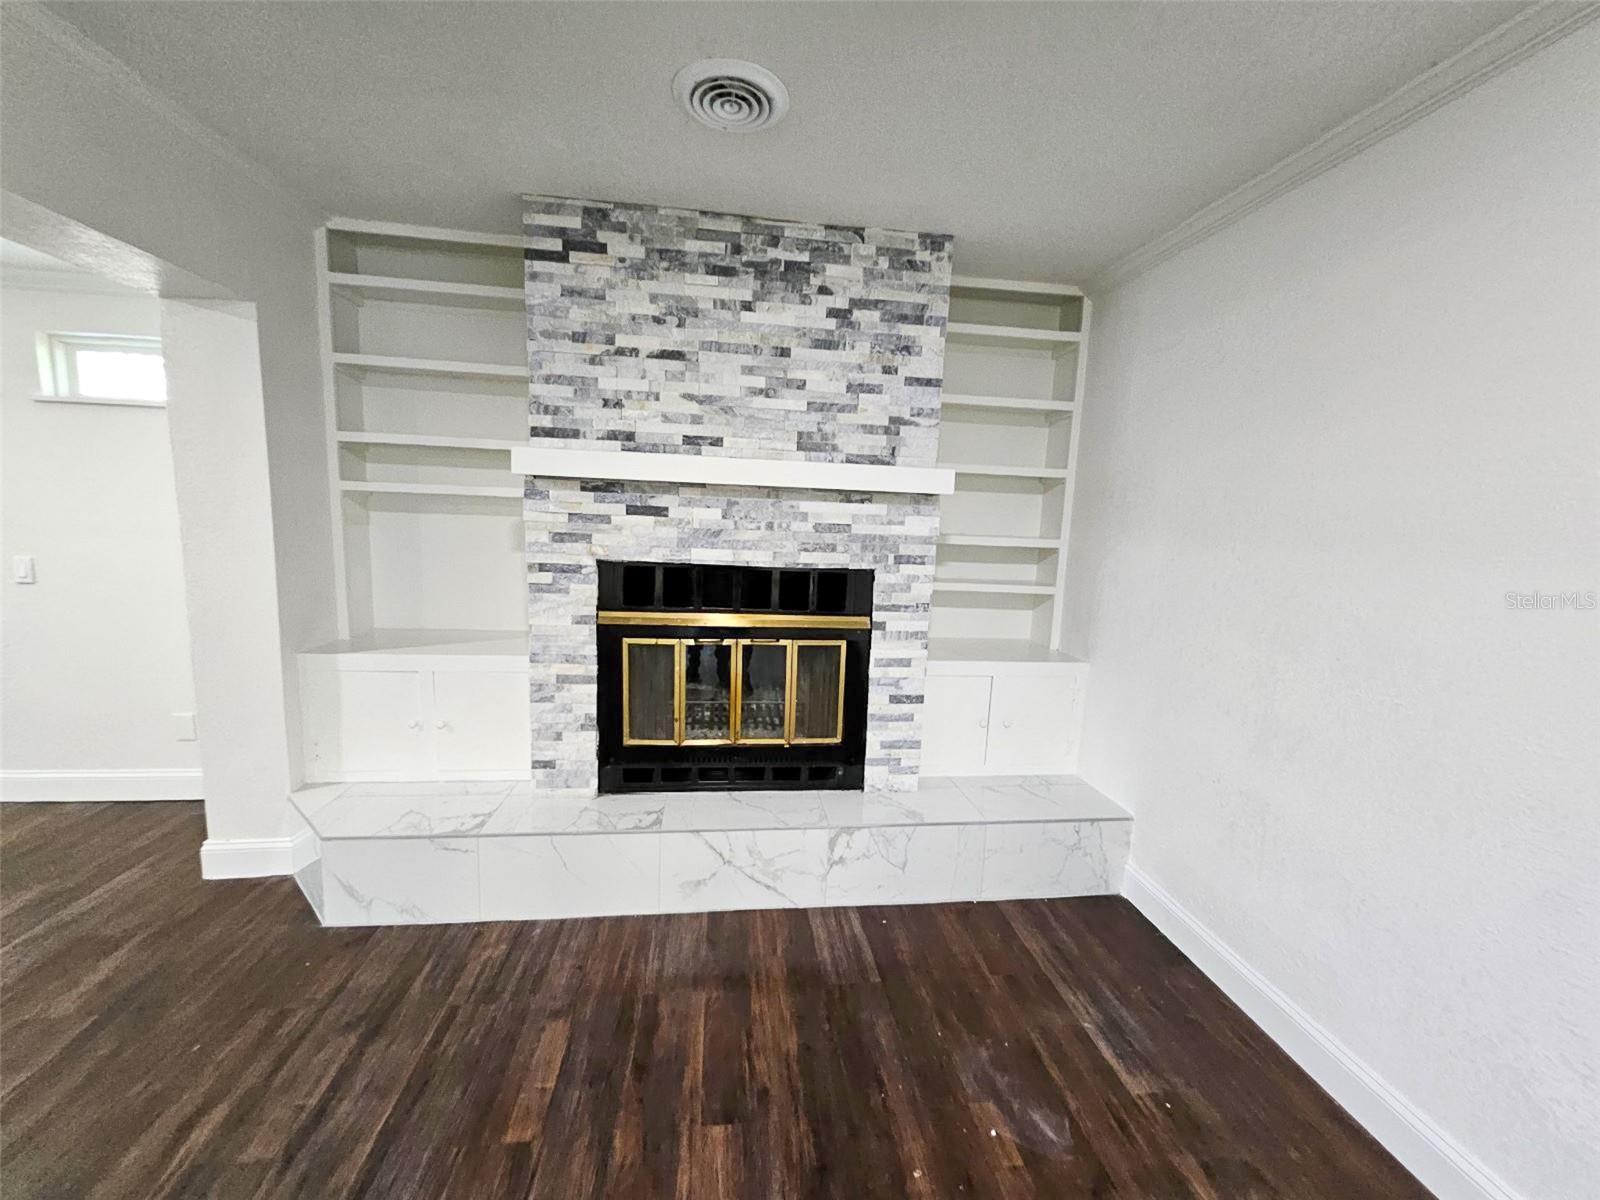 Beatiful Stone Fireplace flanked by shelving